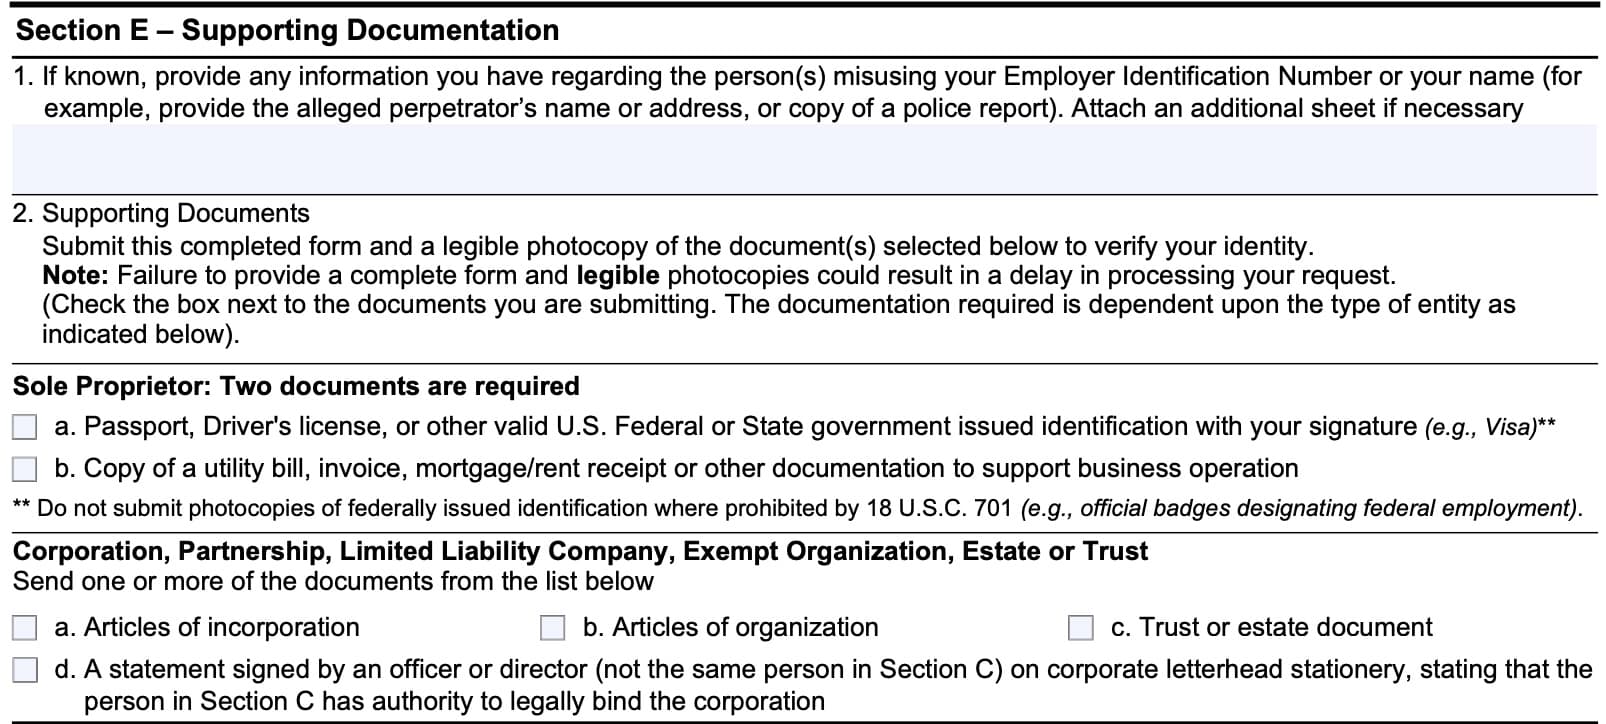 irs form 14039-b, section e: supporting documentation